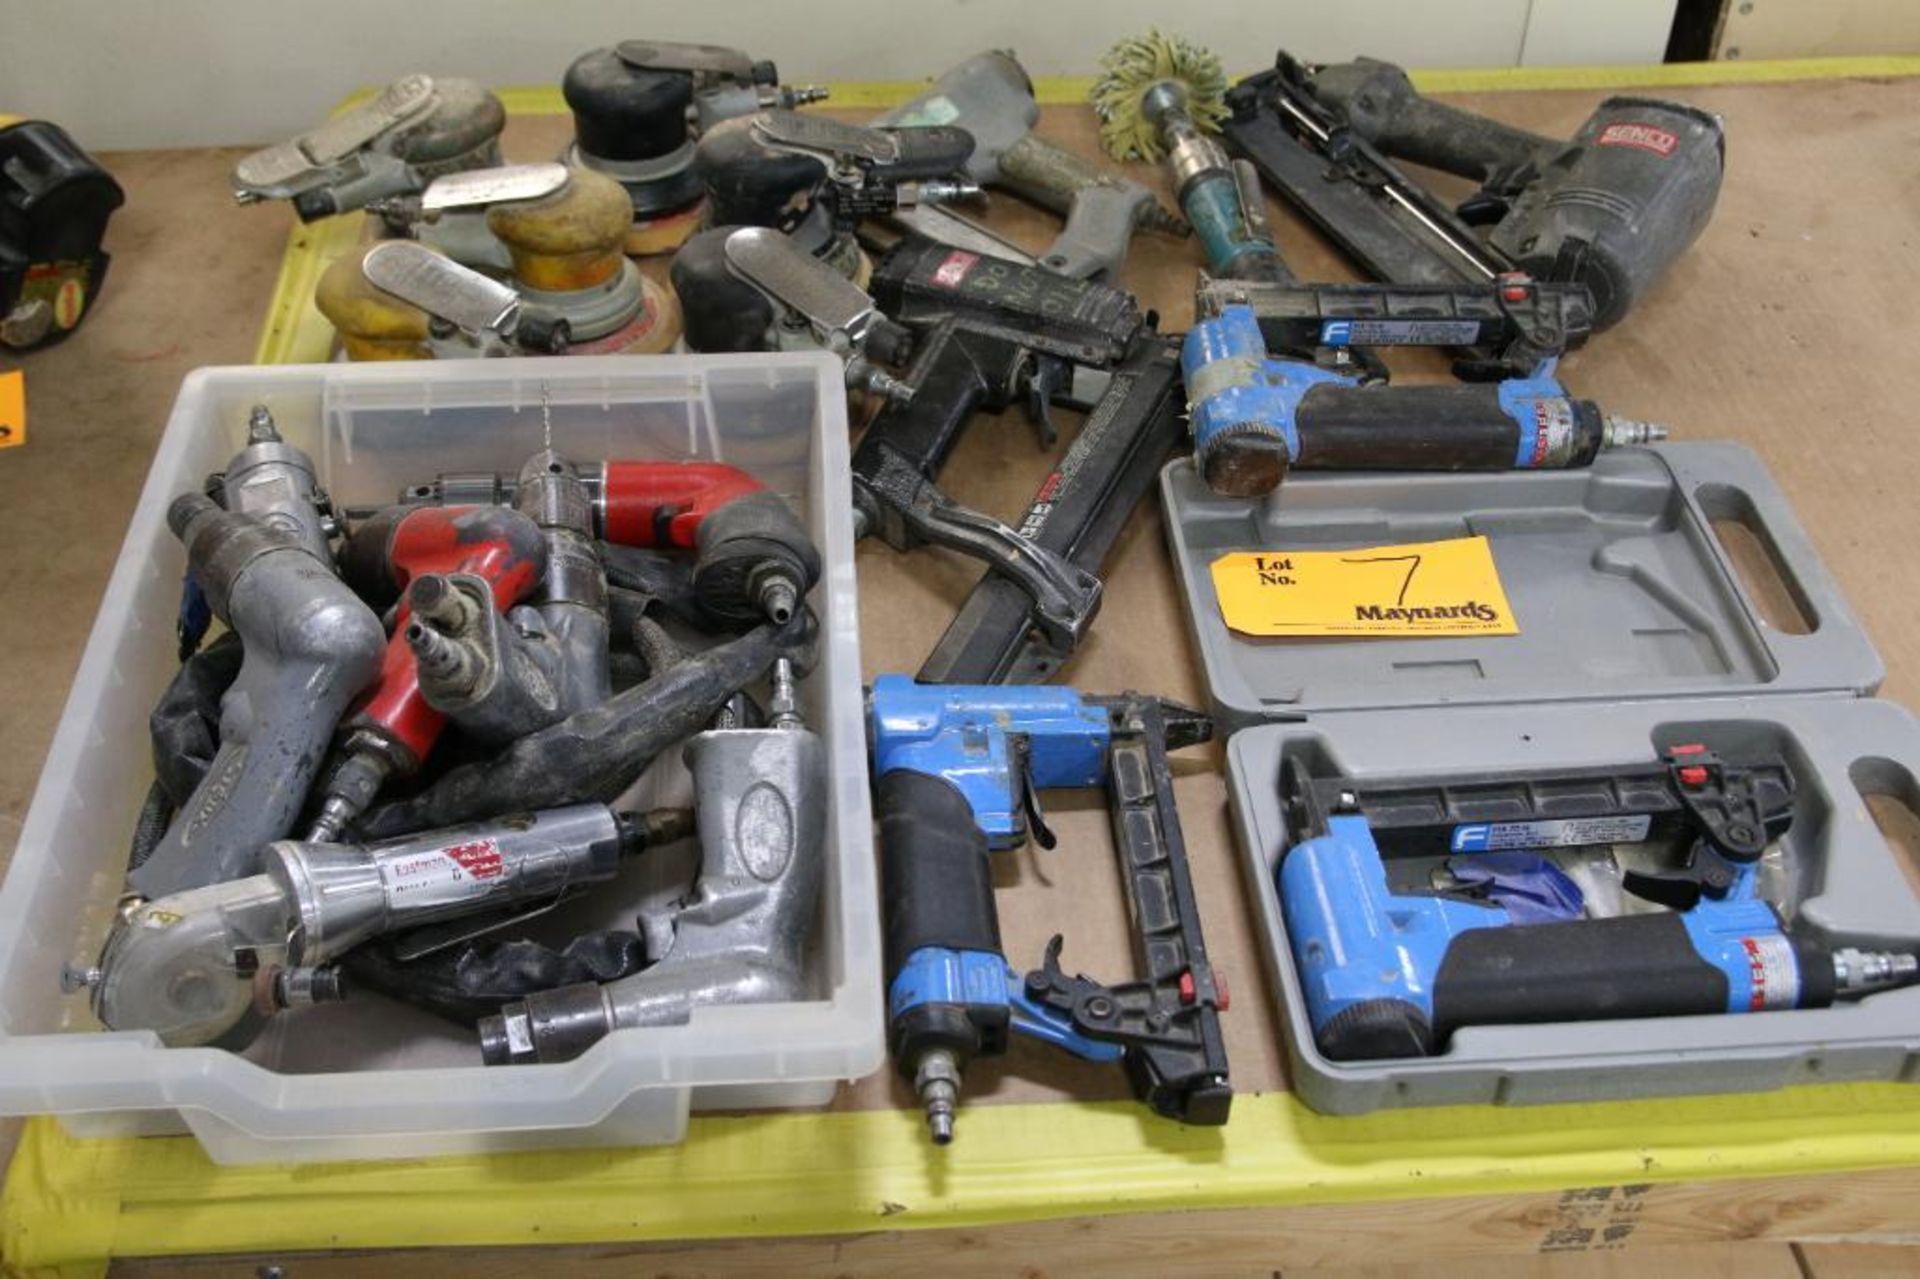 LOT: Air-Powered Hand Tools Including Orbital Sanders, Drills, Staple and Nail Guns